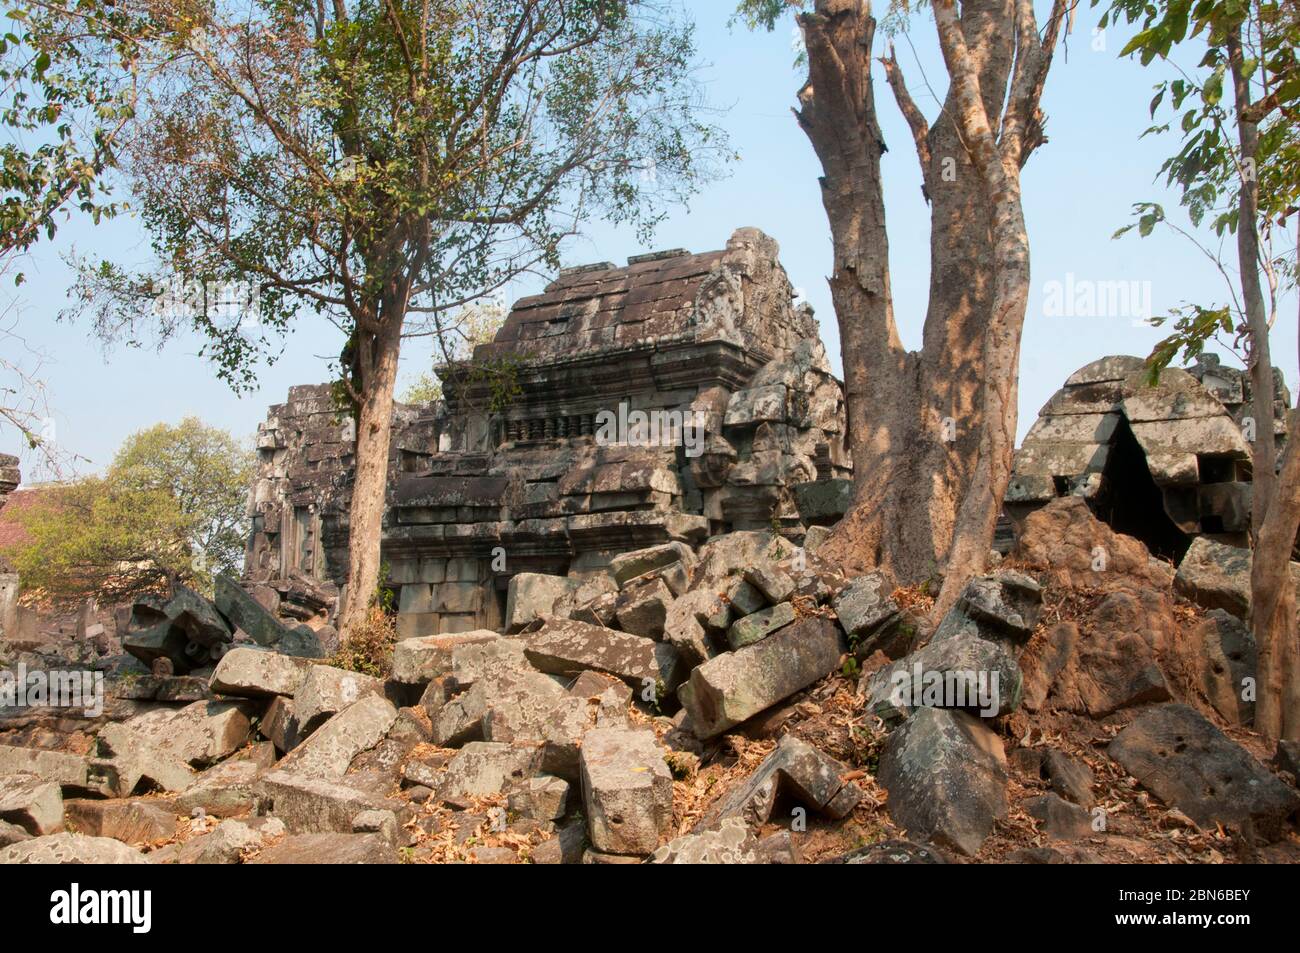 Cambodia: The south library at the early 11th century hilltop Khmer temple, Chau Srei Vibol (also known as Wat Trak), near Angkor.  The unrestored Hin Stock Photo